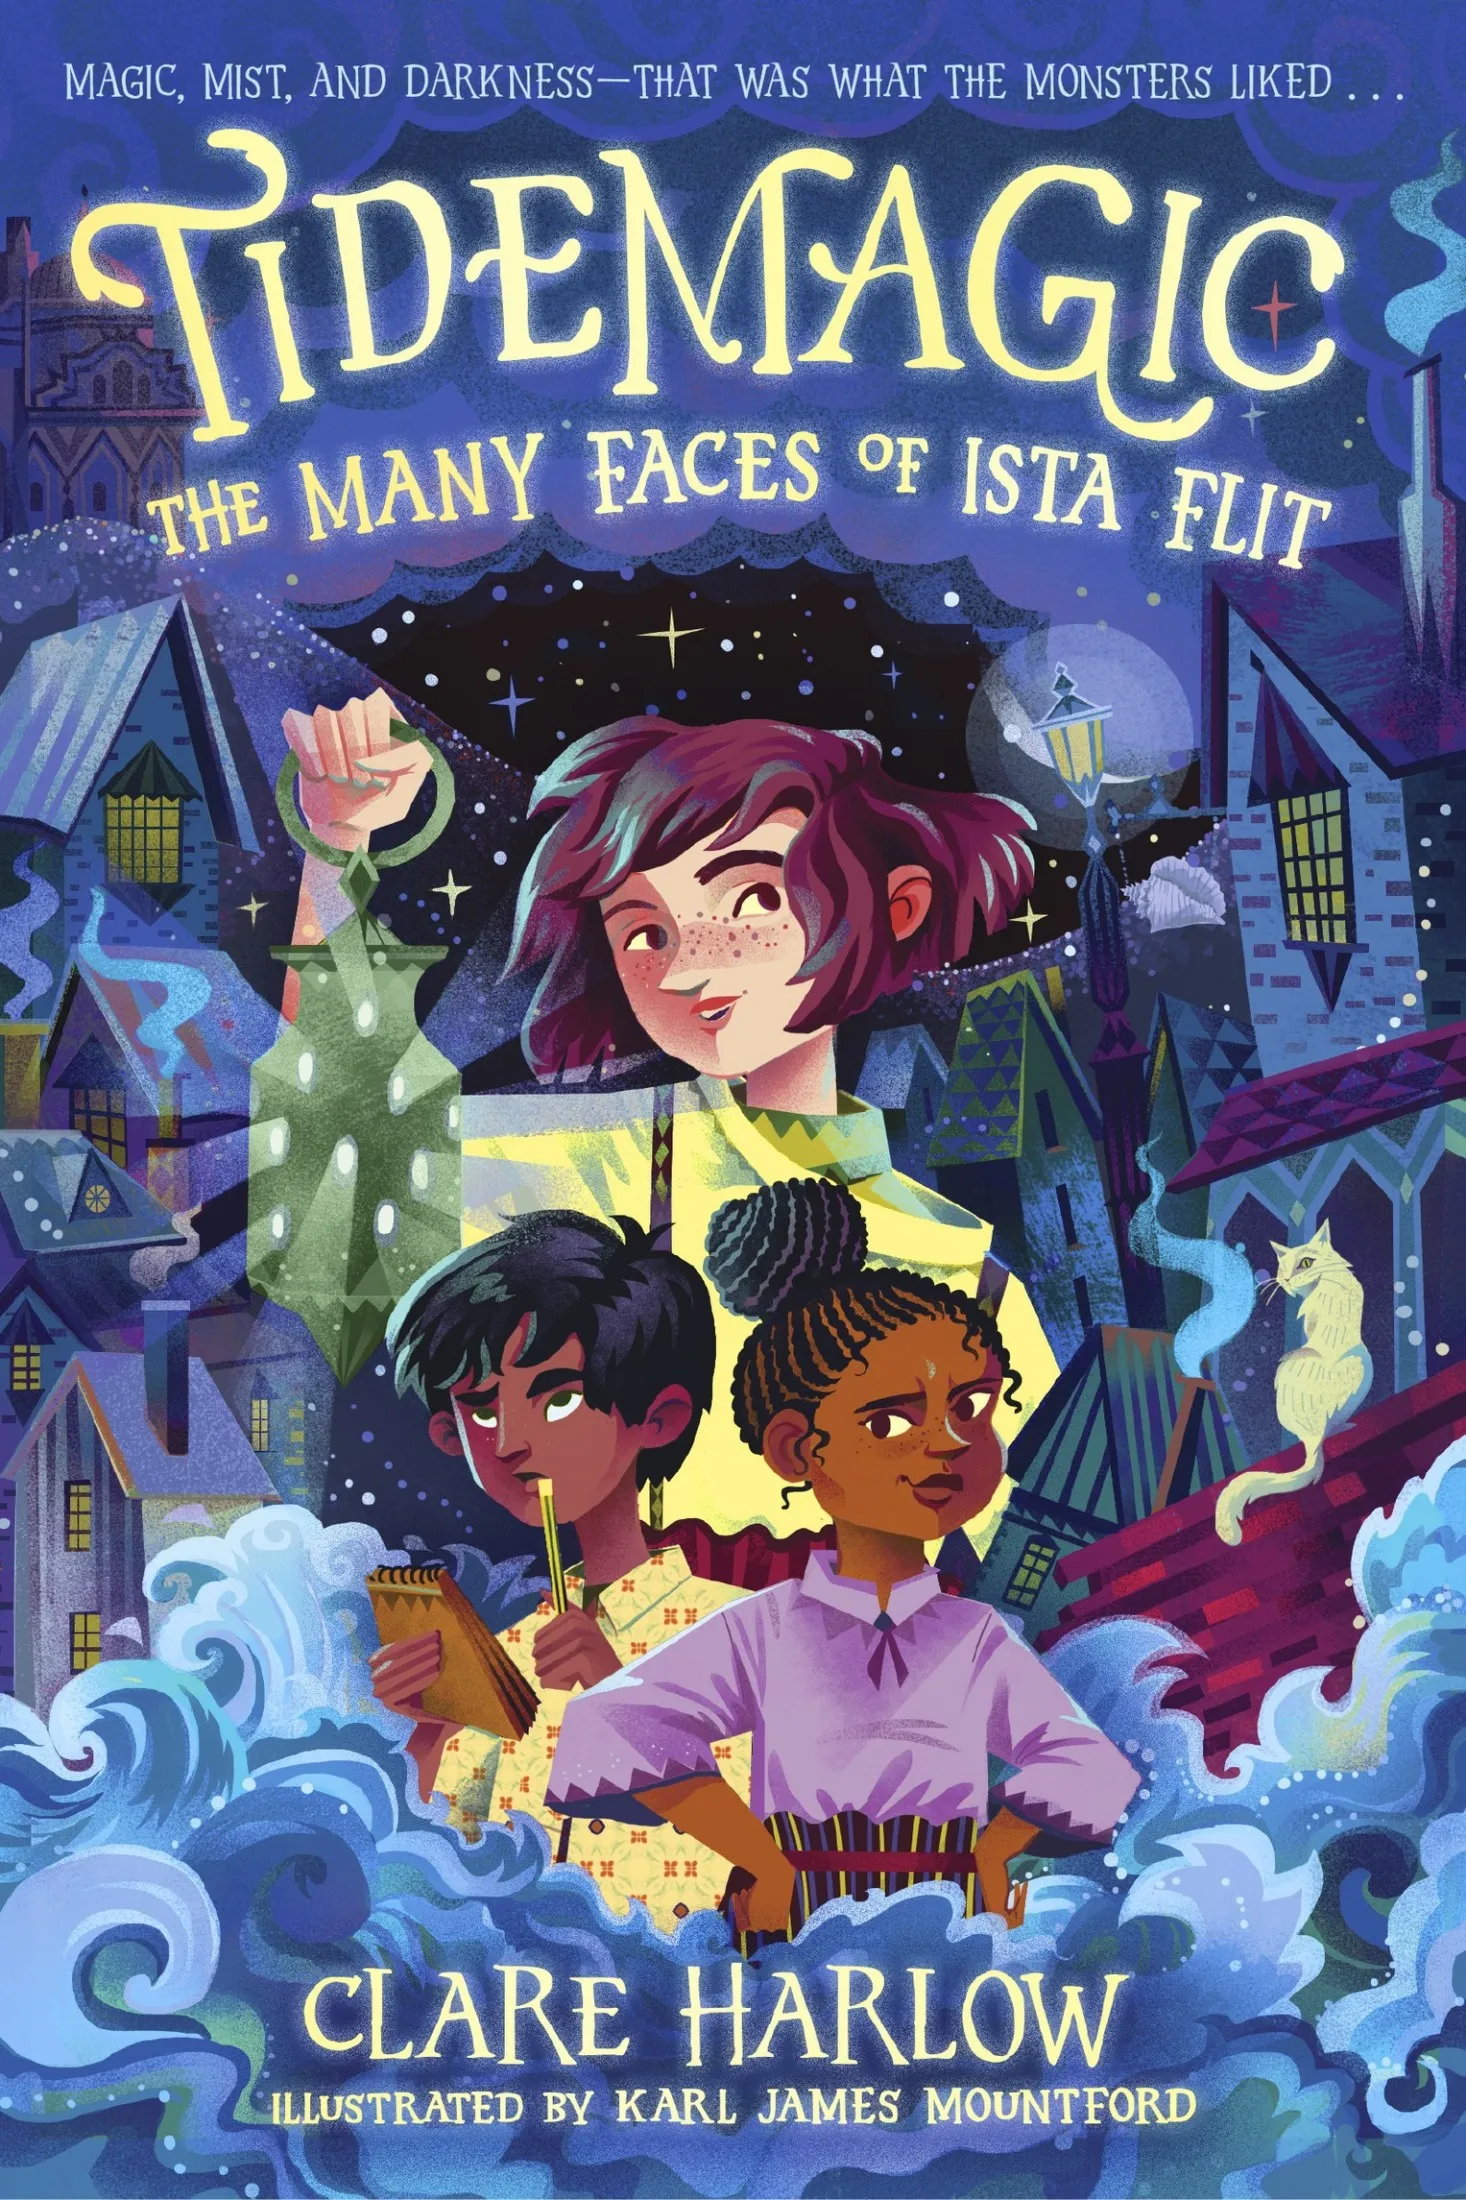 The Many Faces of Ista Flit (Tidemagic #1)